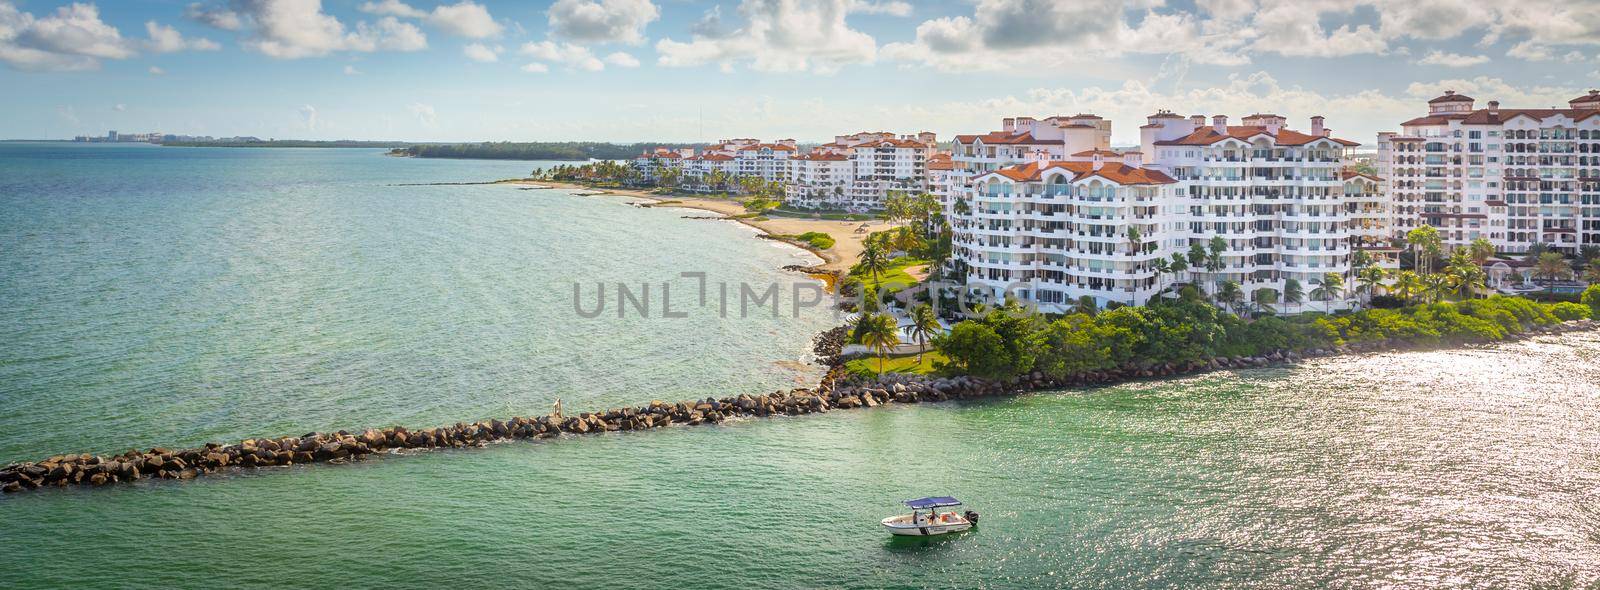 MIAMI, USA - SEPTEMBER 06, 2014 :View of apartments in Fisher Island on September 06, 2014 in Miami. by Mariakray